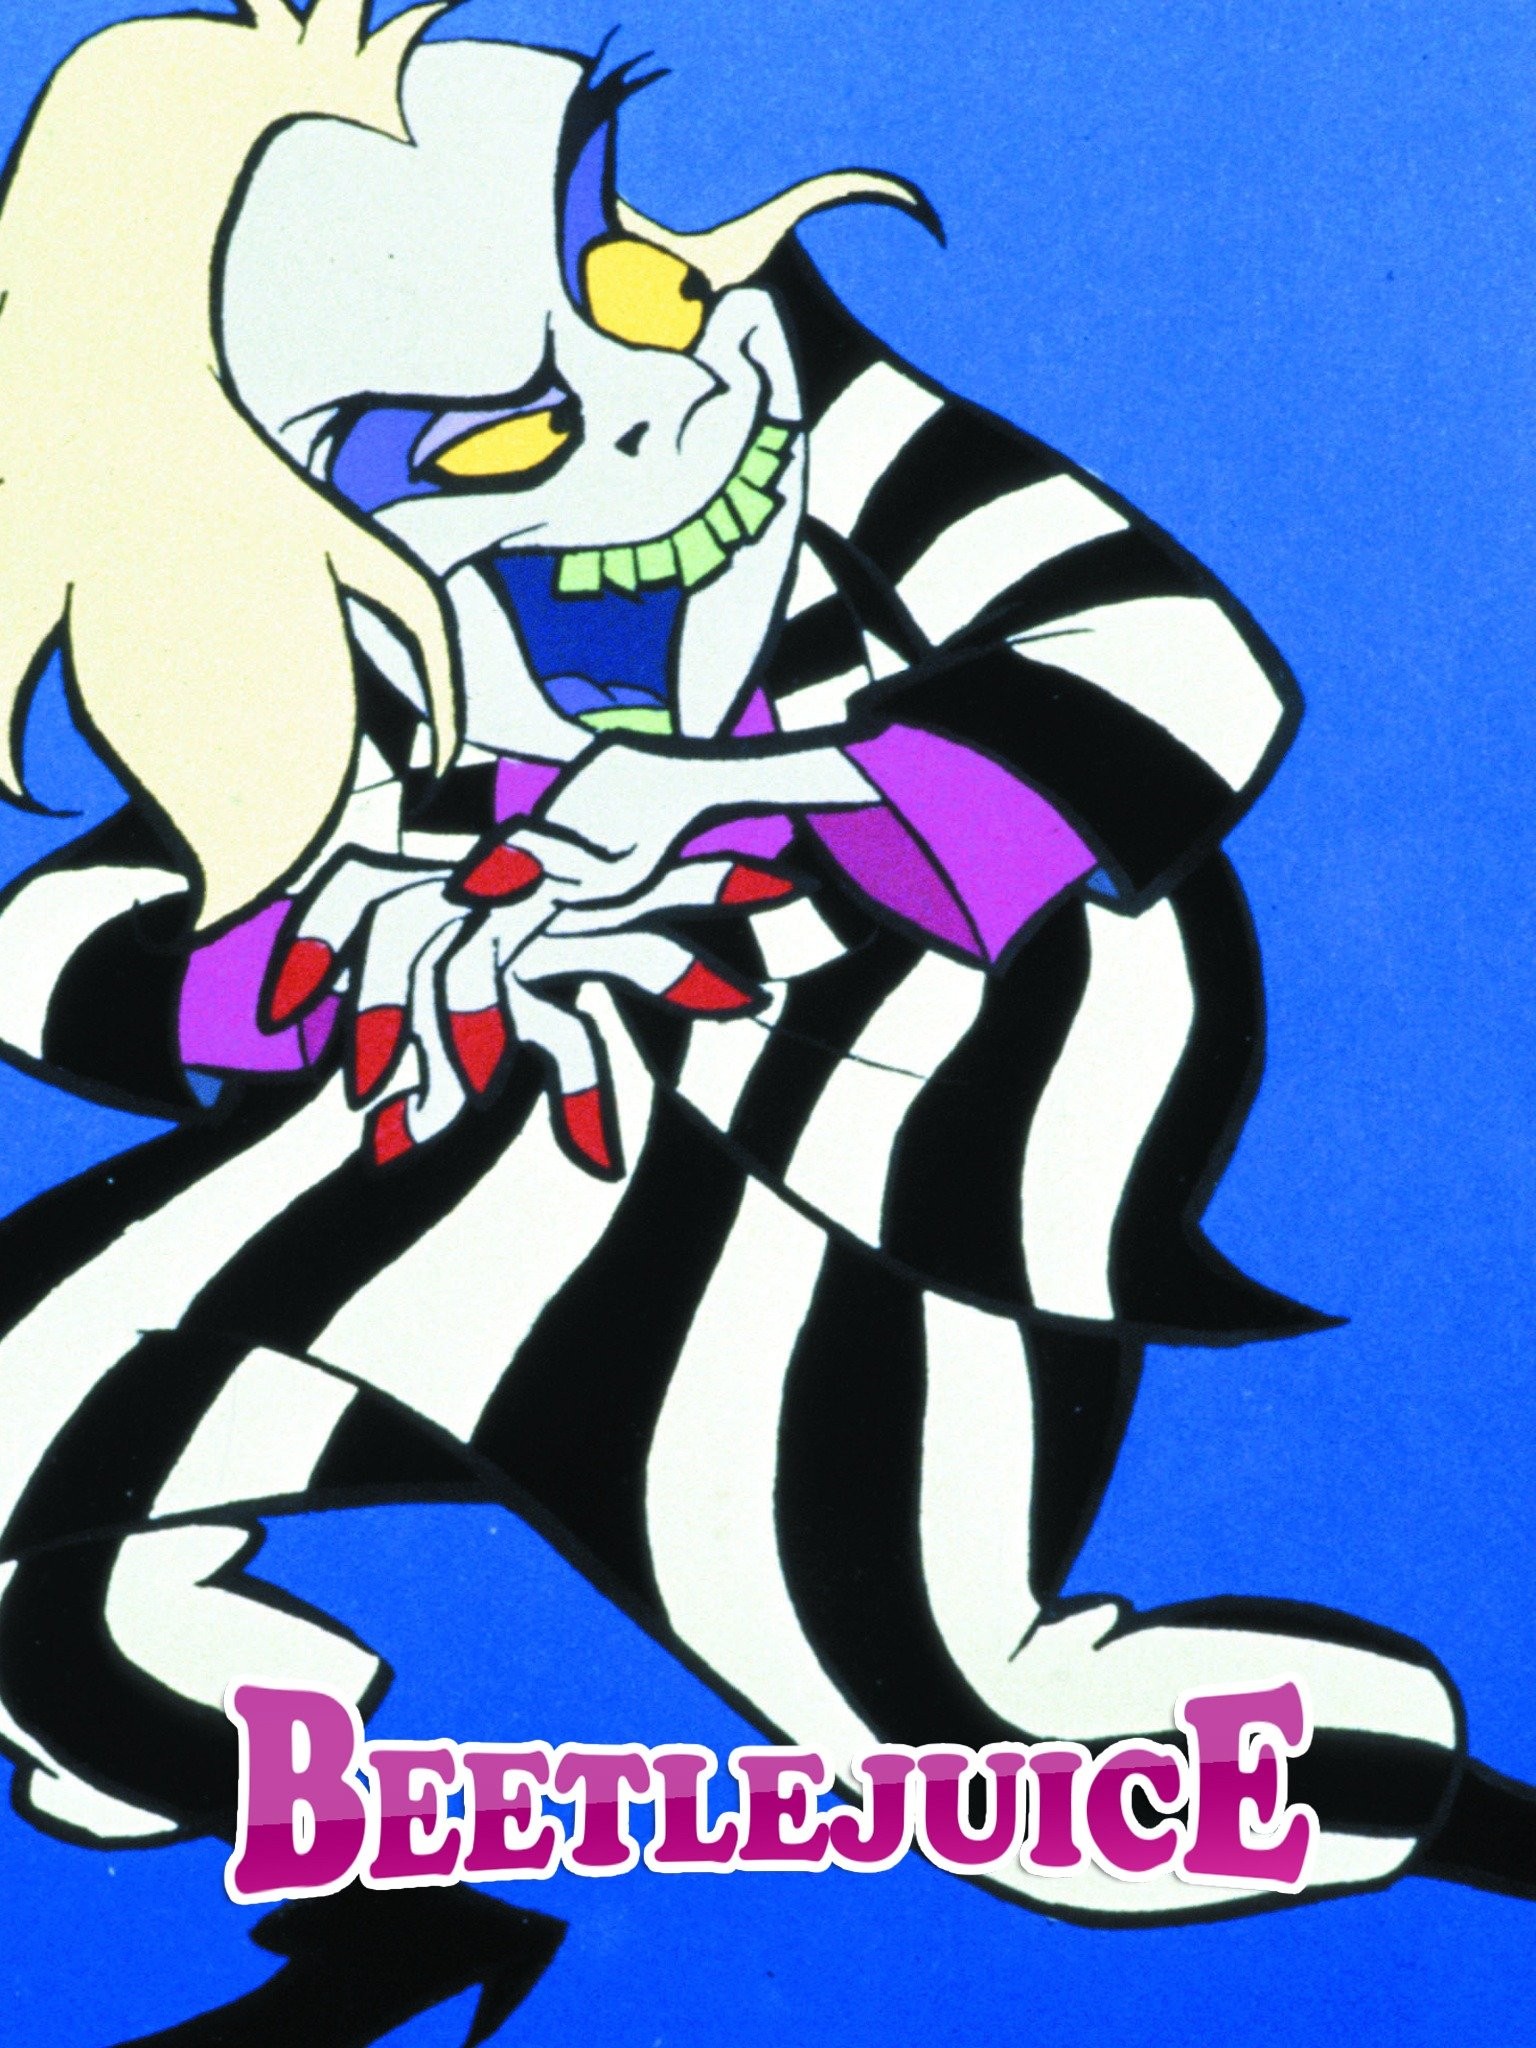 Beetlejuice Gets Official Anime Girl Makeover